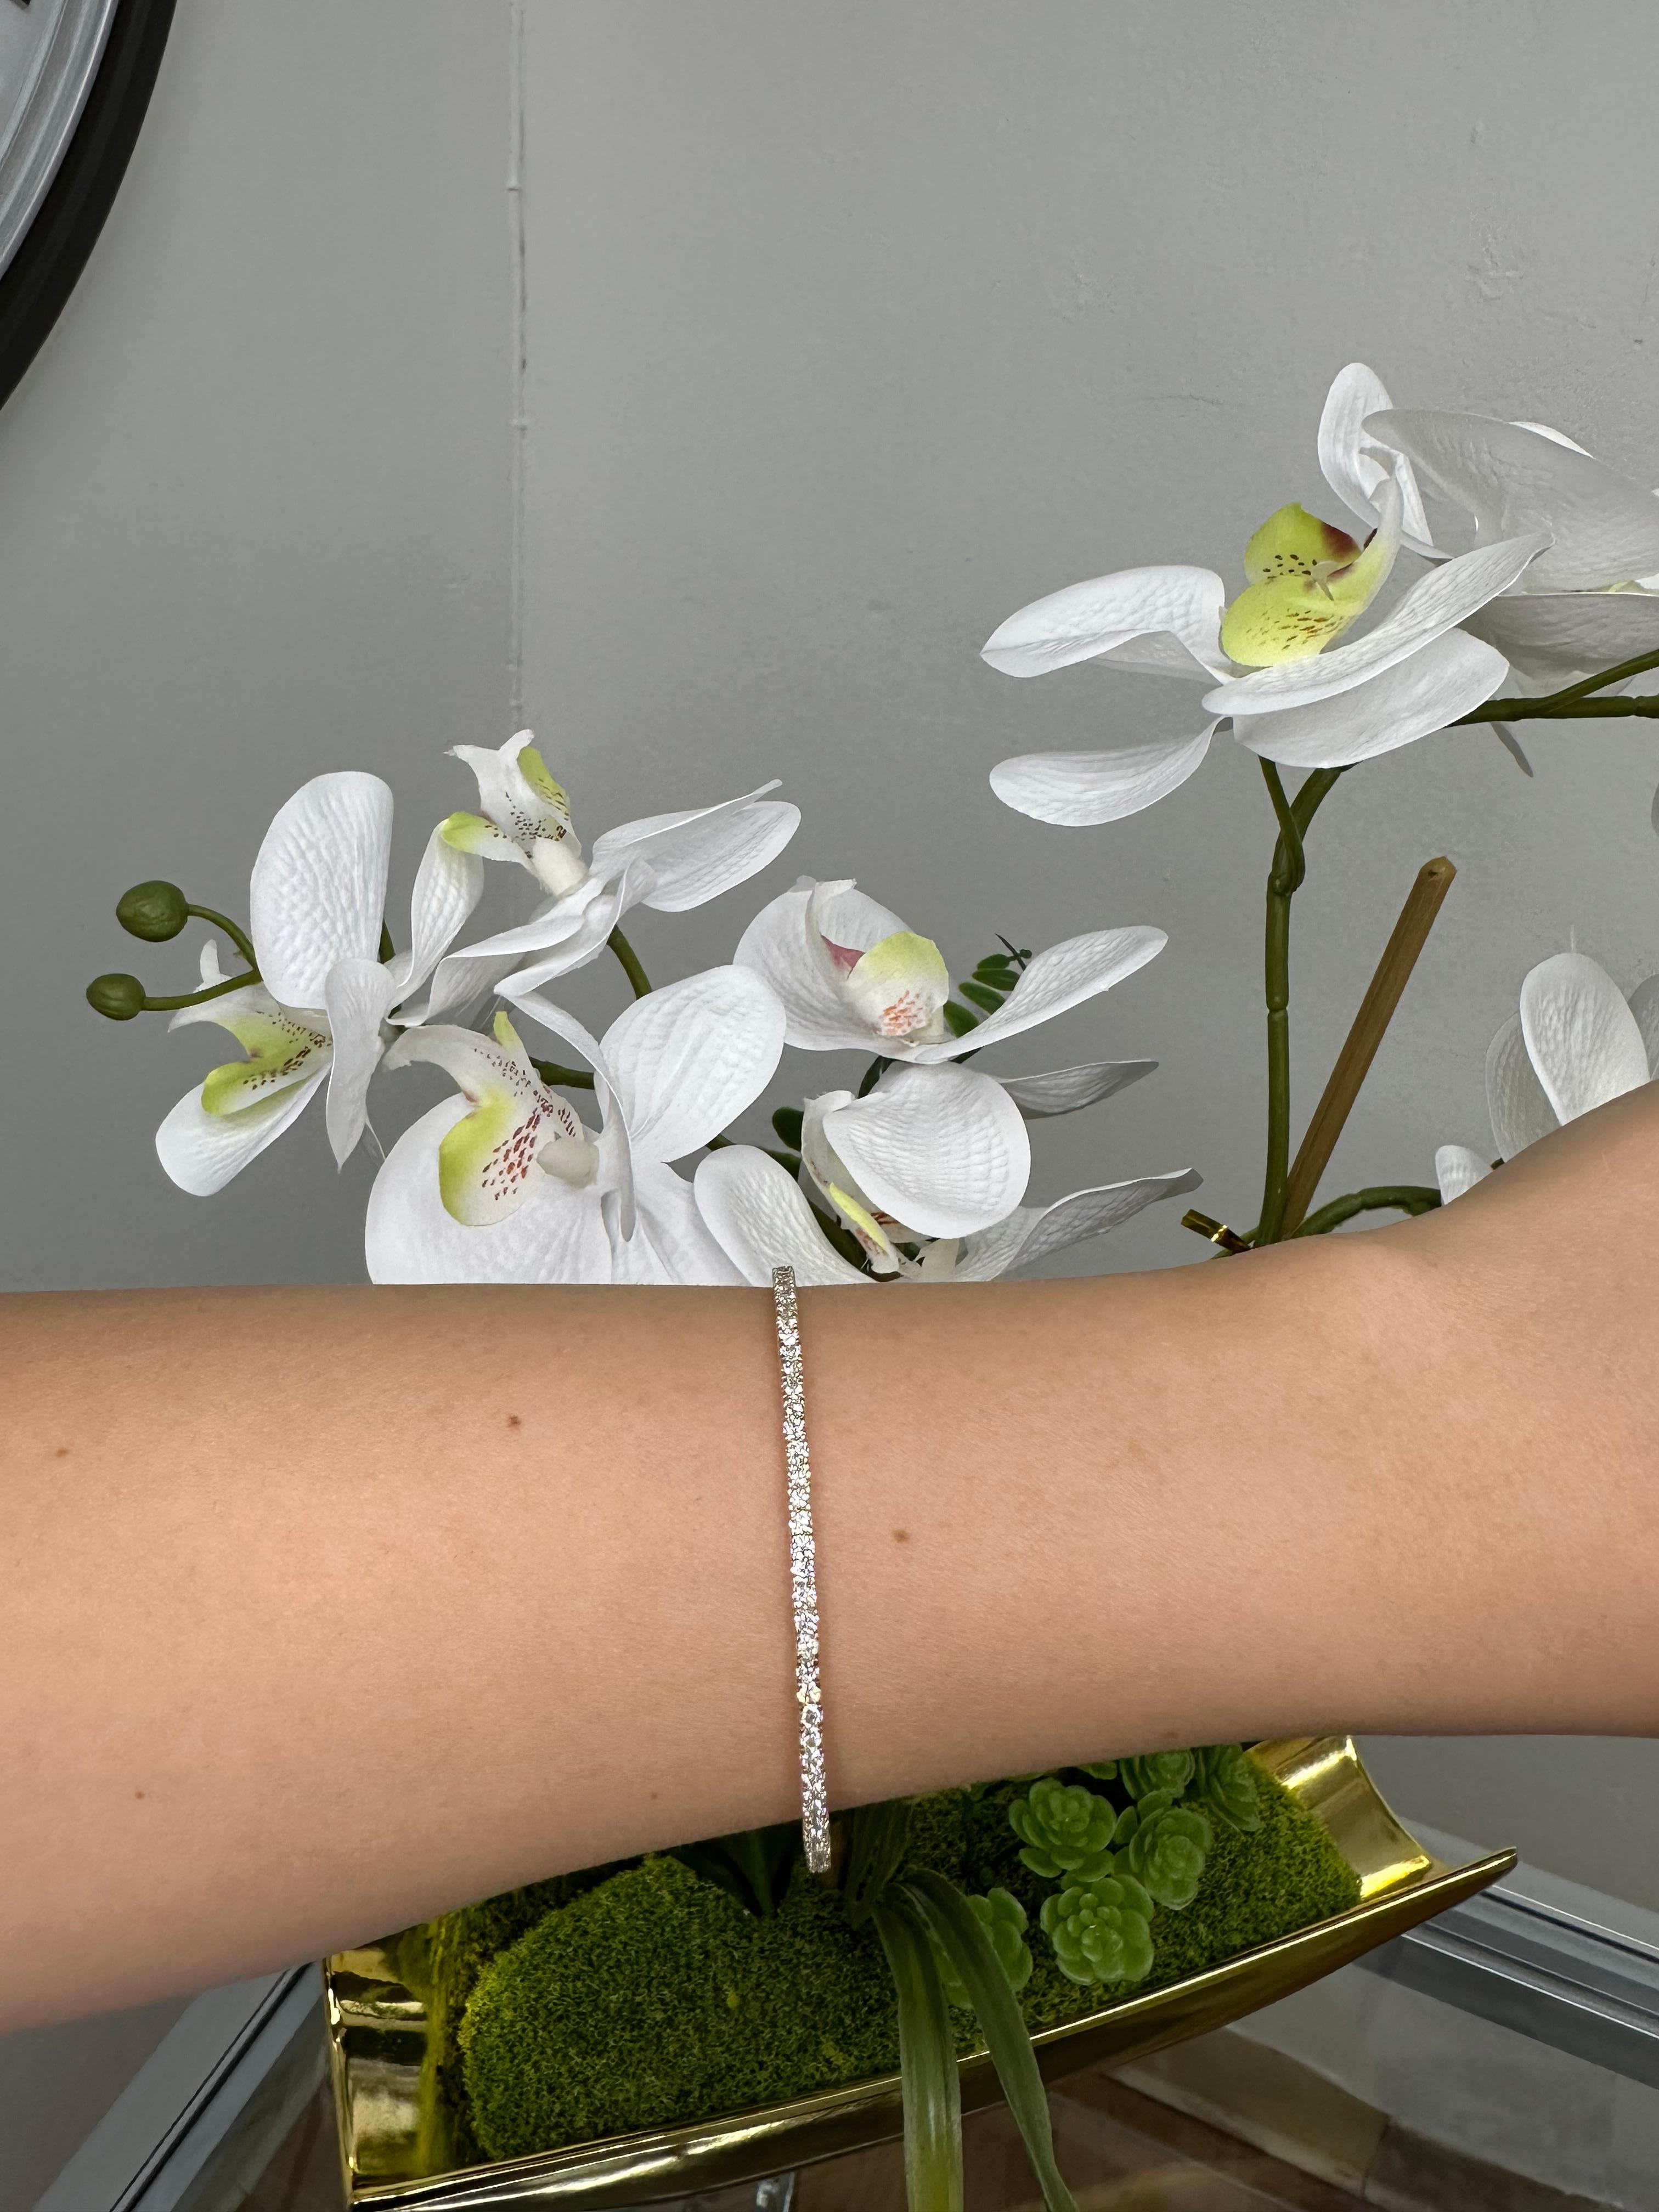 This gorgeous 1.71 Carat Flexible Diamond Bangle is a must-have. The durability of this because of its flexibility is astonishing and will surely impress. This piece goes with any outfit on everyday wear or can be accompanied for a more glamorous